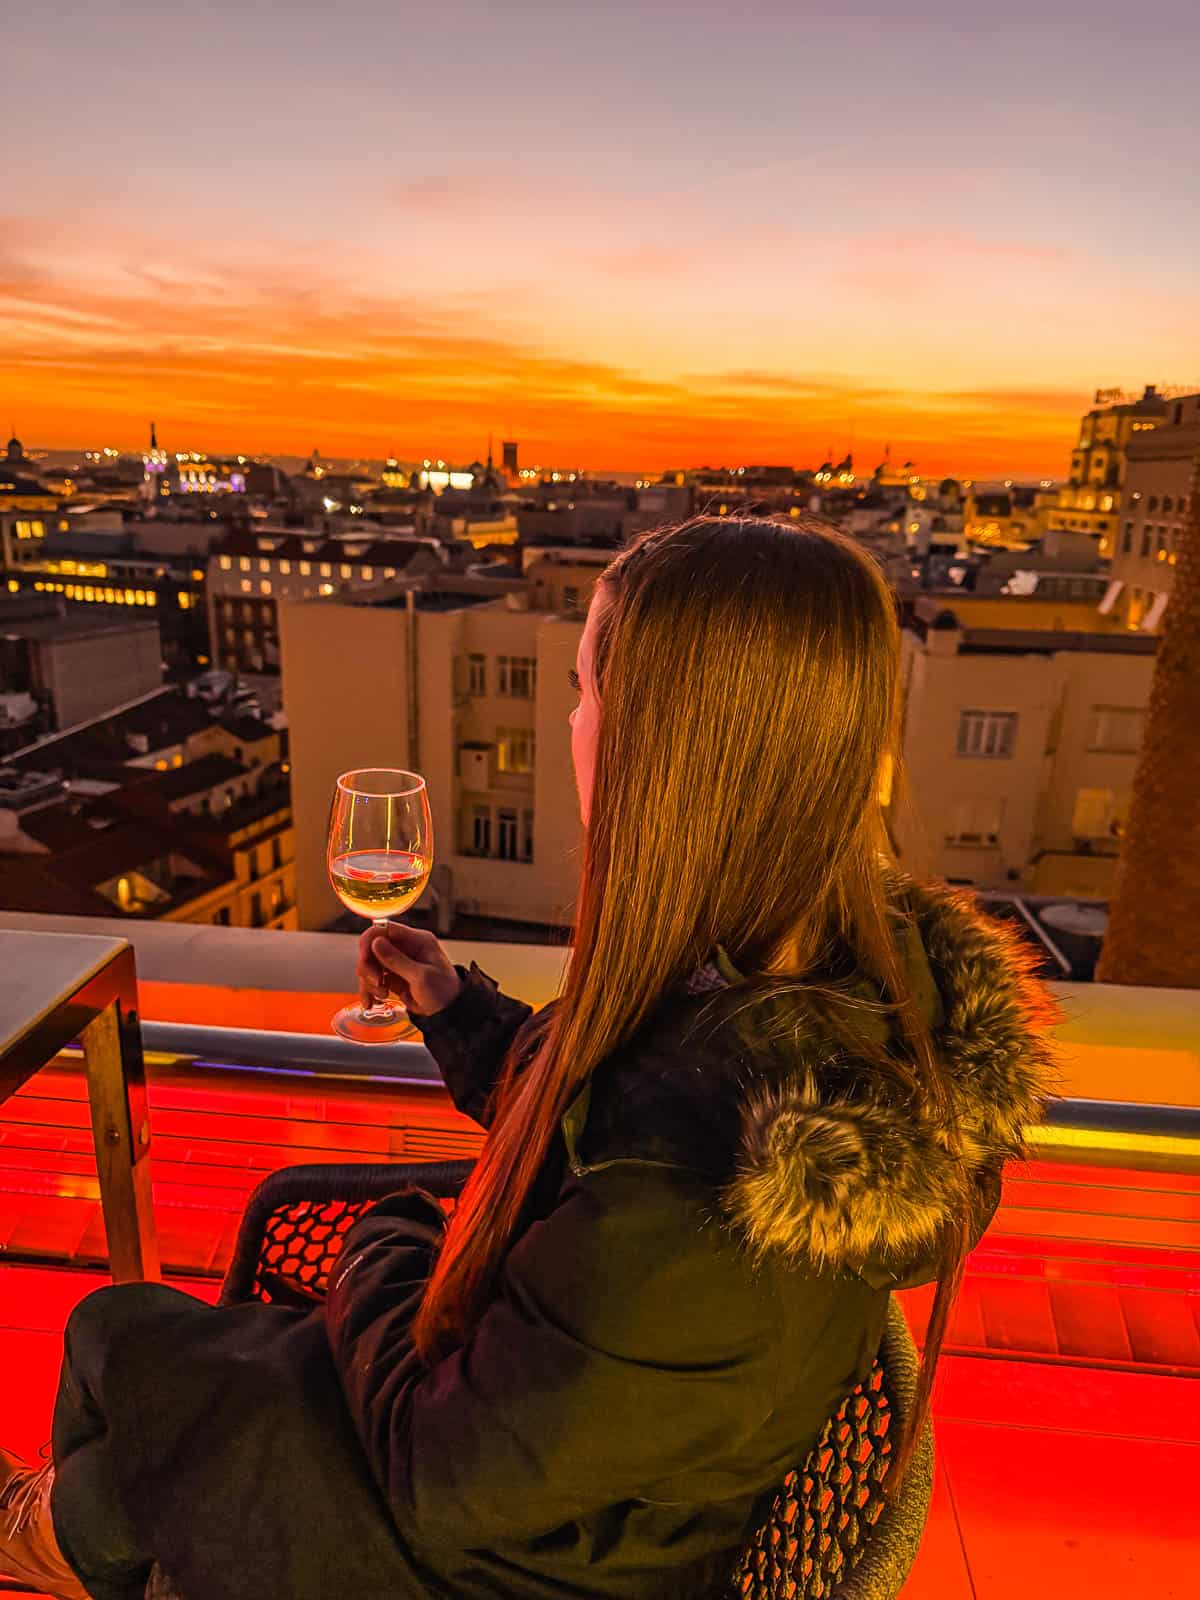 A woman enjoys a glass of wine on a rooftop terrace at sunset, with a panoramic view of Madrid's cityscape bathed in warm hues of orange and red, reflecting a tranquil urban evening